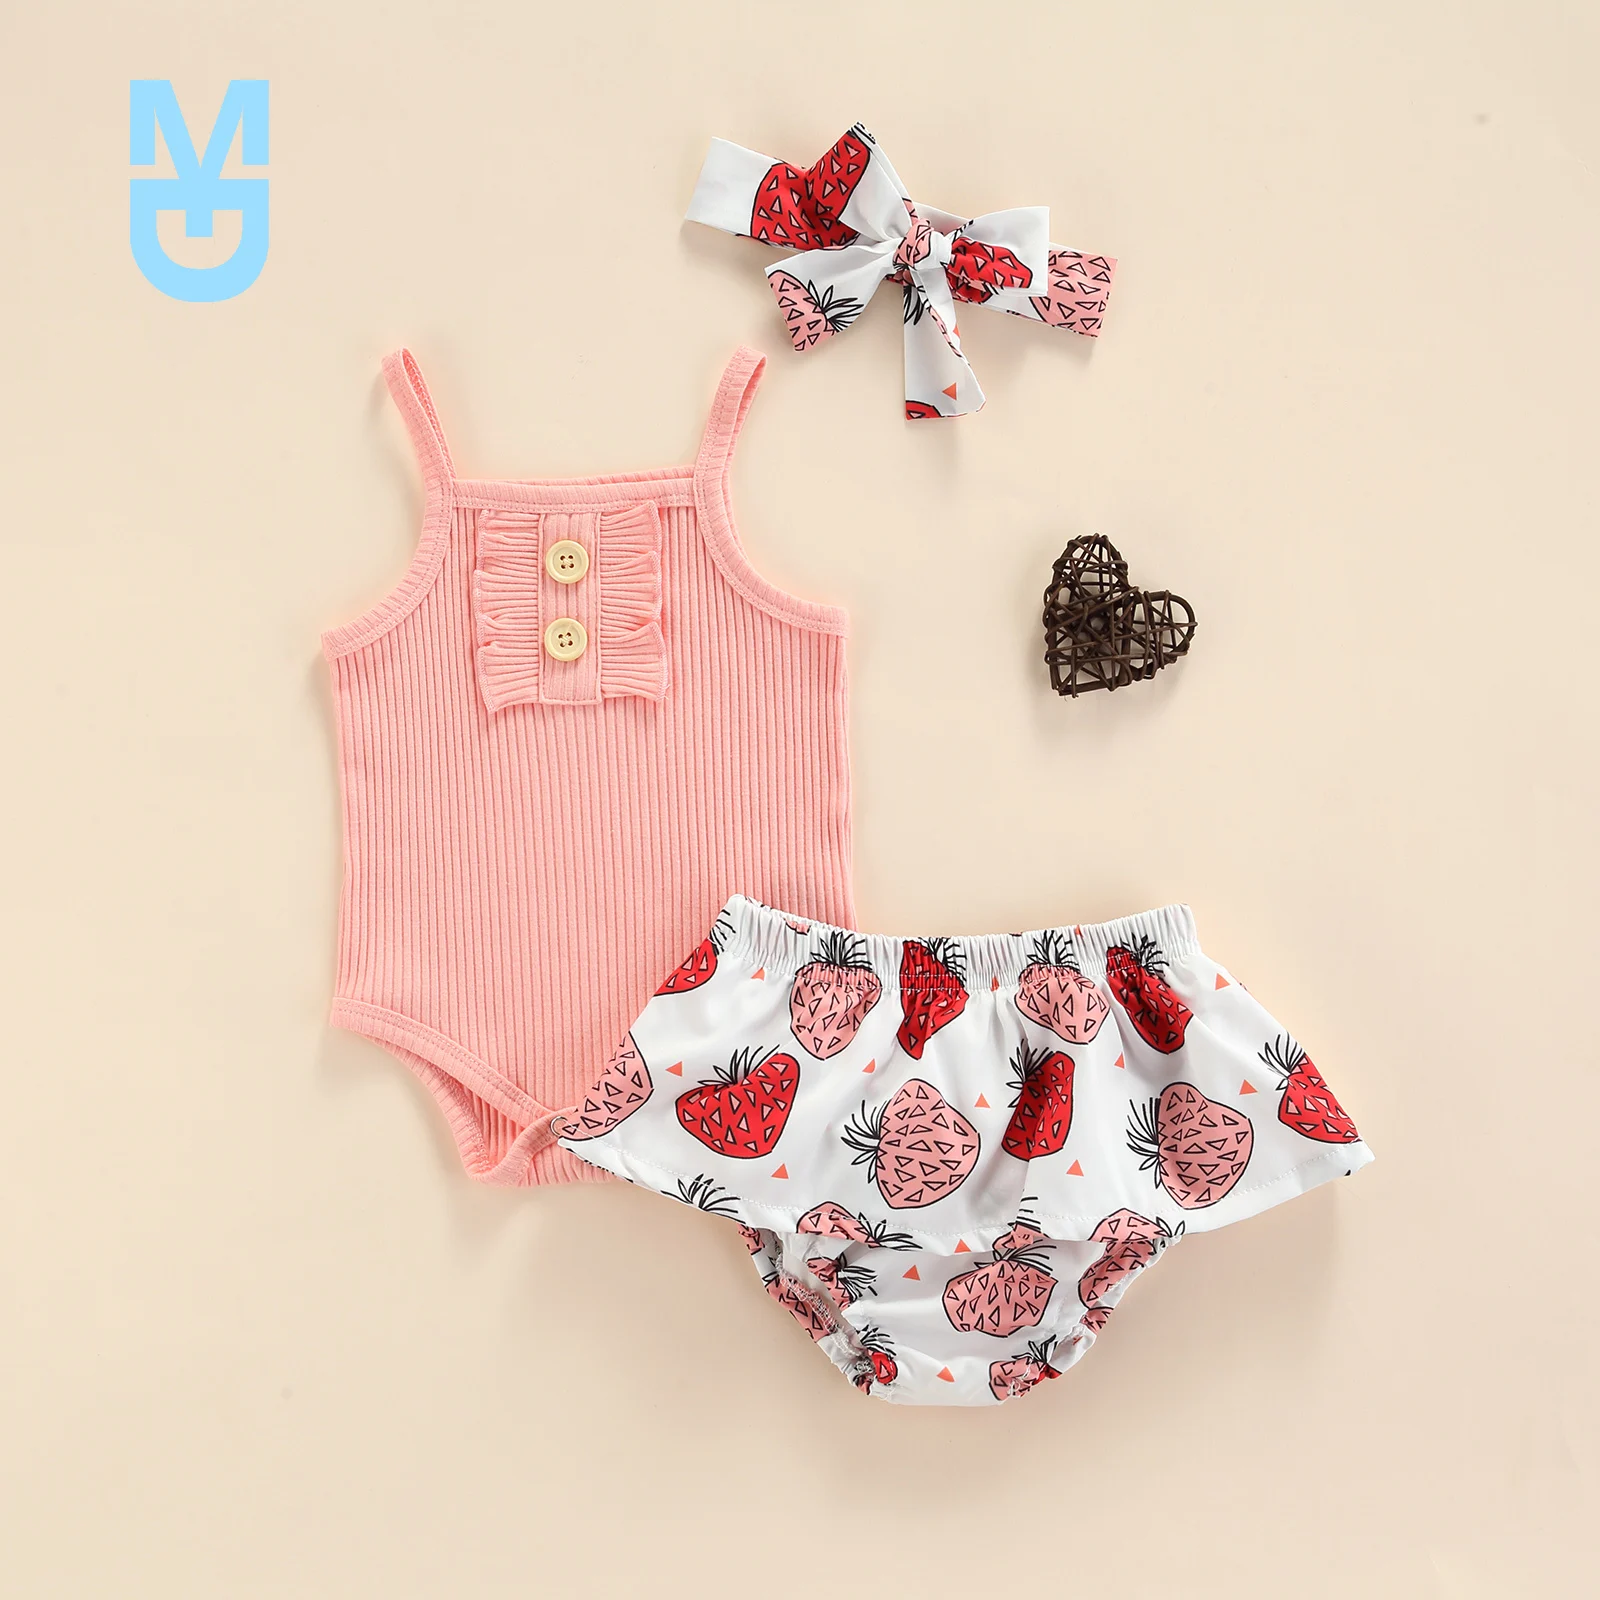 

New 0-24M Summer Infant Baby Girls Clothes Sets born Baby Cotton Ribbed Casual Sleeveless Romper Tops Shorts Headband 3pcs Suit